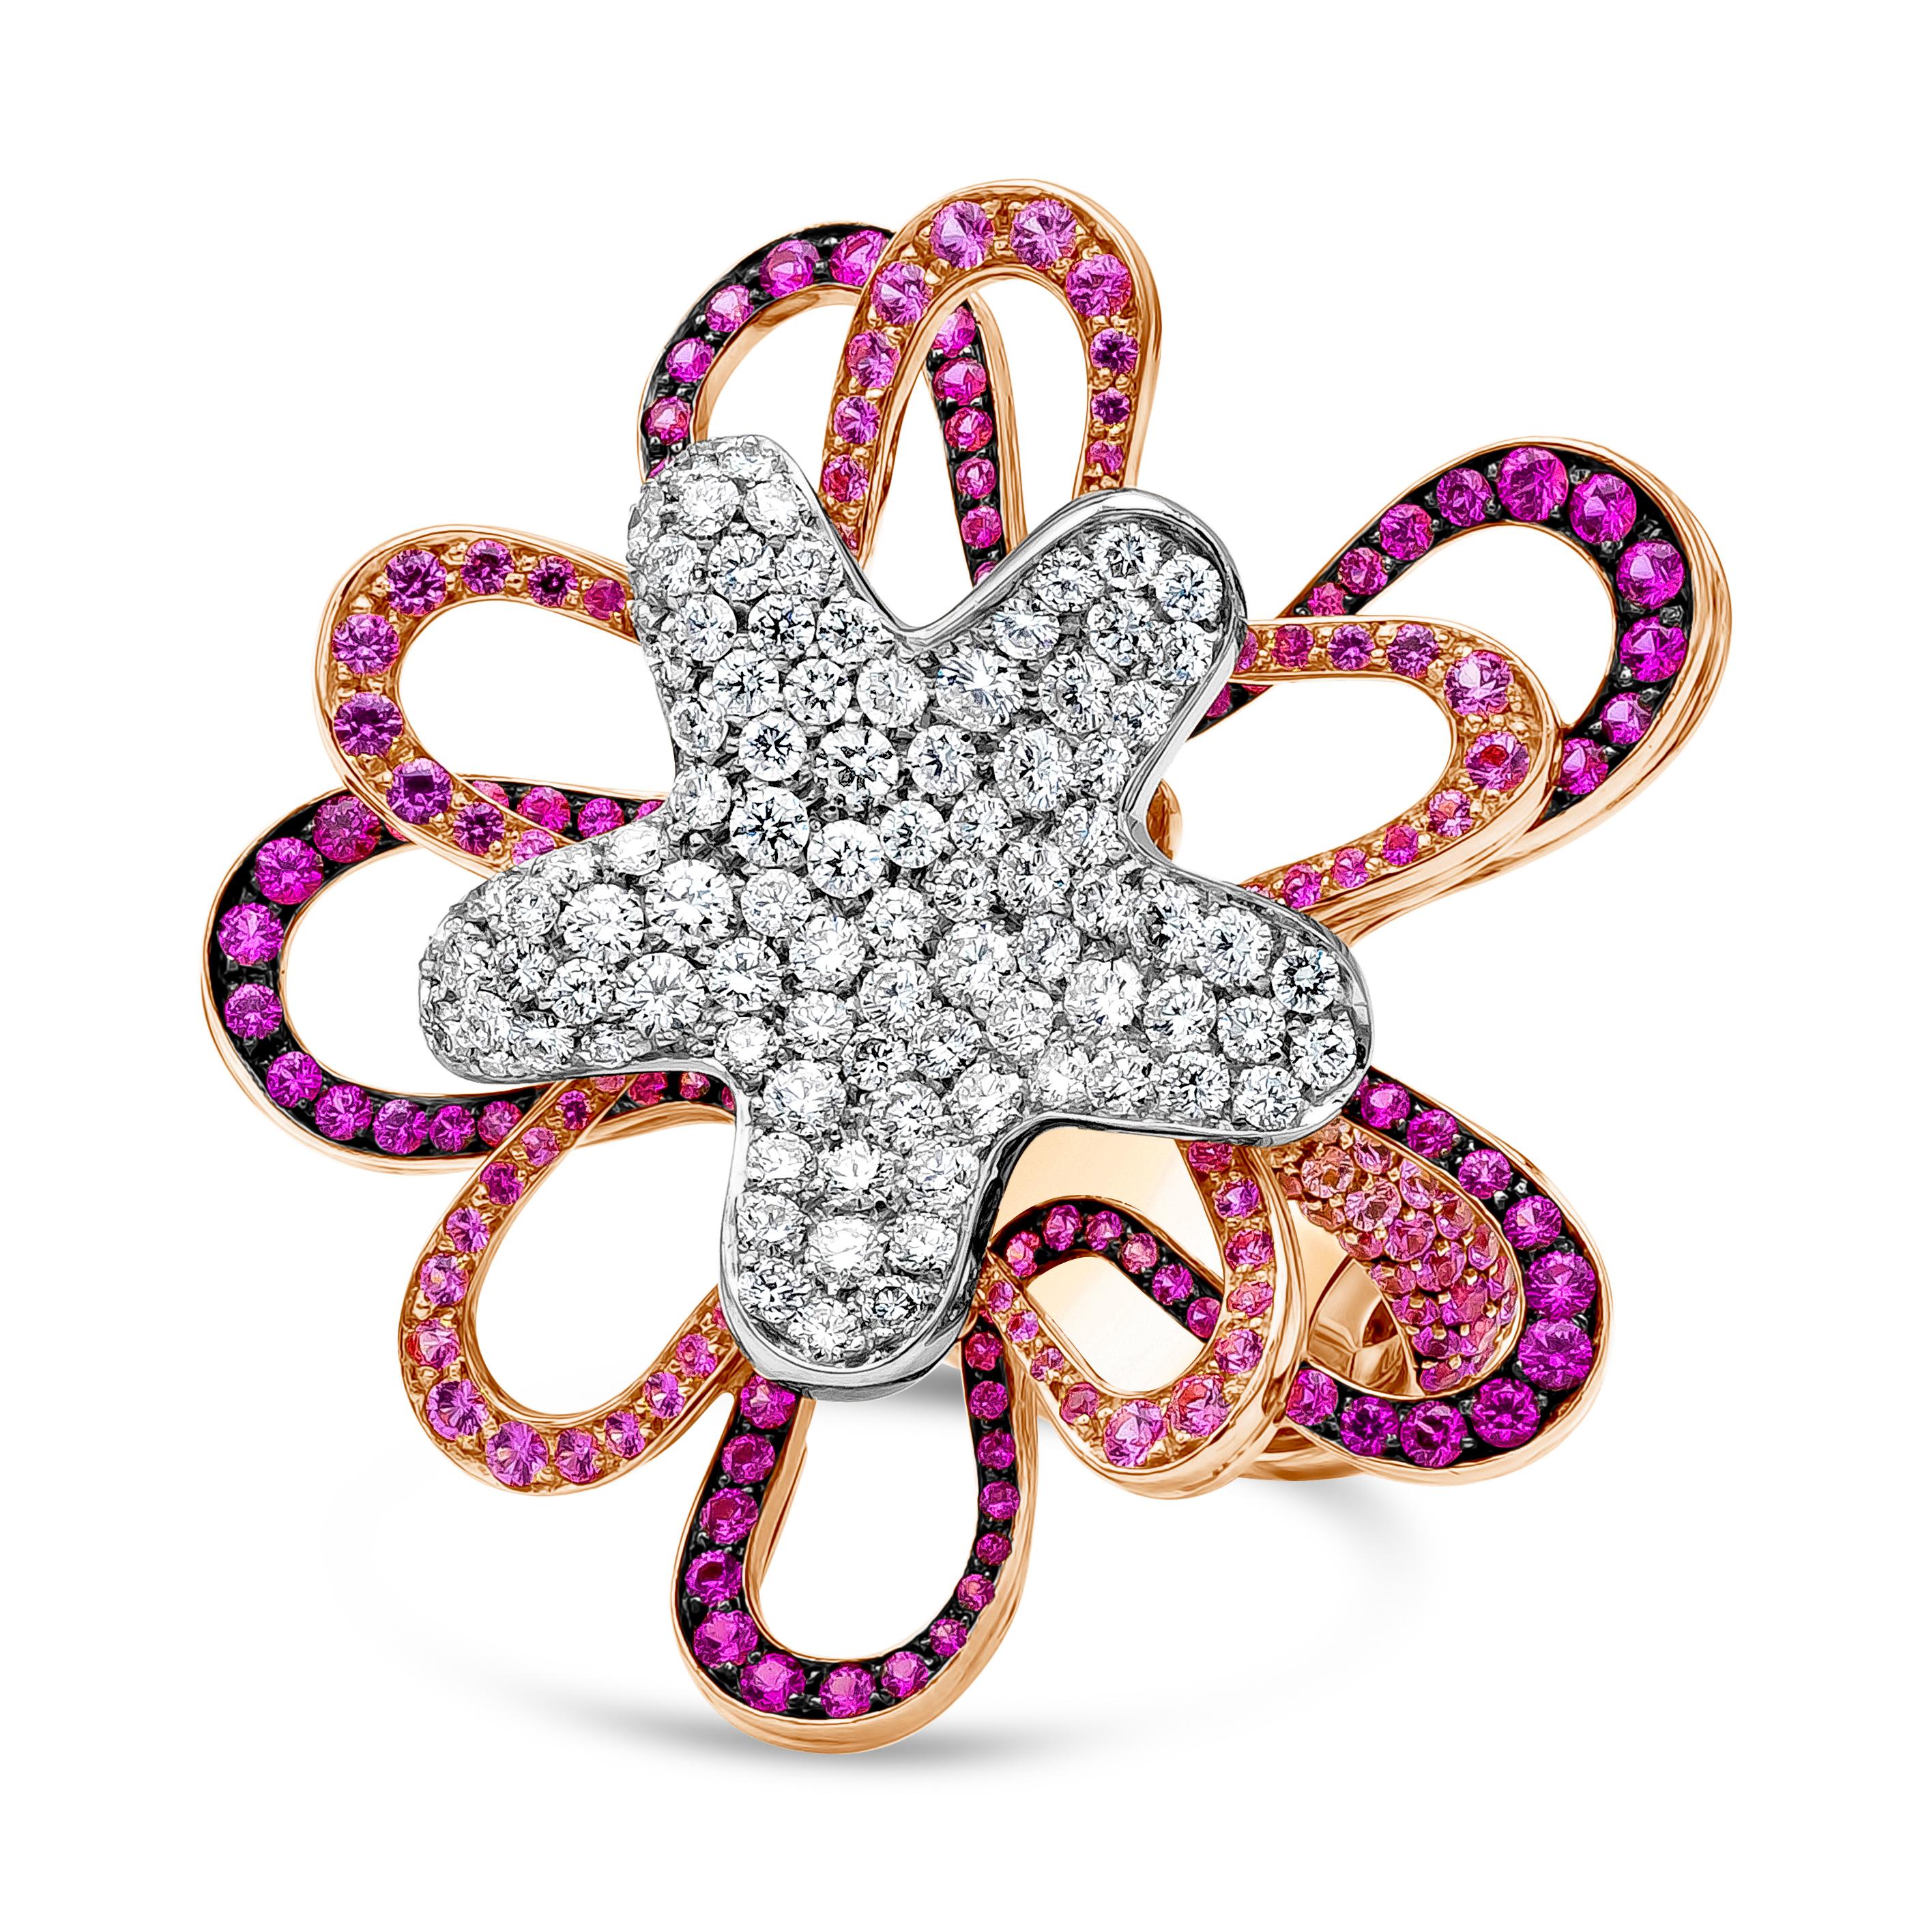 An exquisite and elegant open work fashion ring in flower motif featuring purplish-pink sapphire weighing 4.94 carats set in a 18K Rose Gold setting. On the center of the piece are brilliant round white diamonds weighing 3.23 carats, F Color and VS